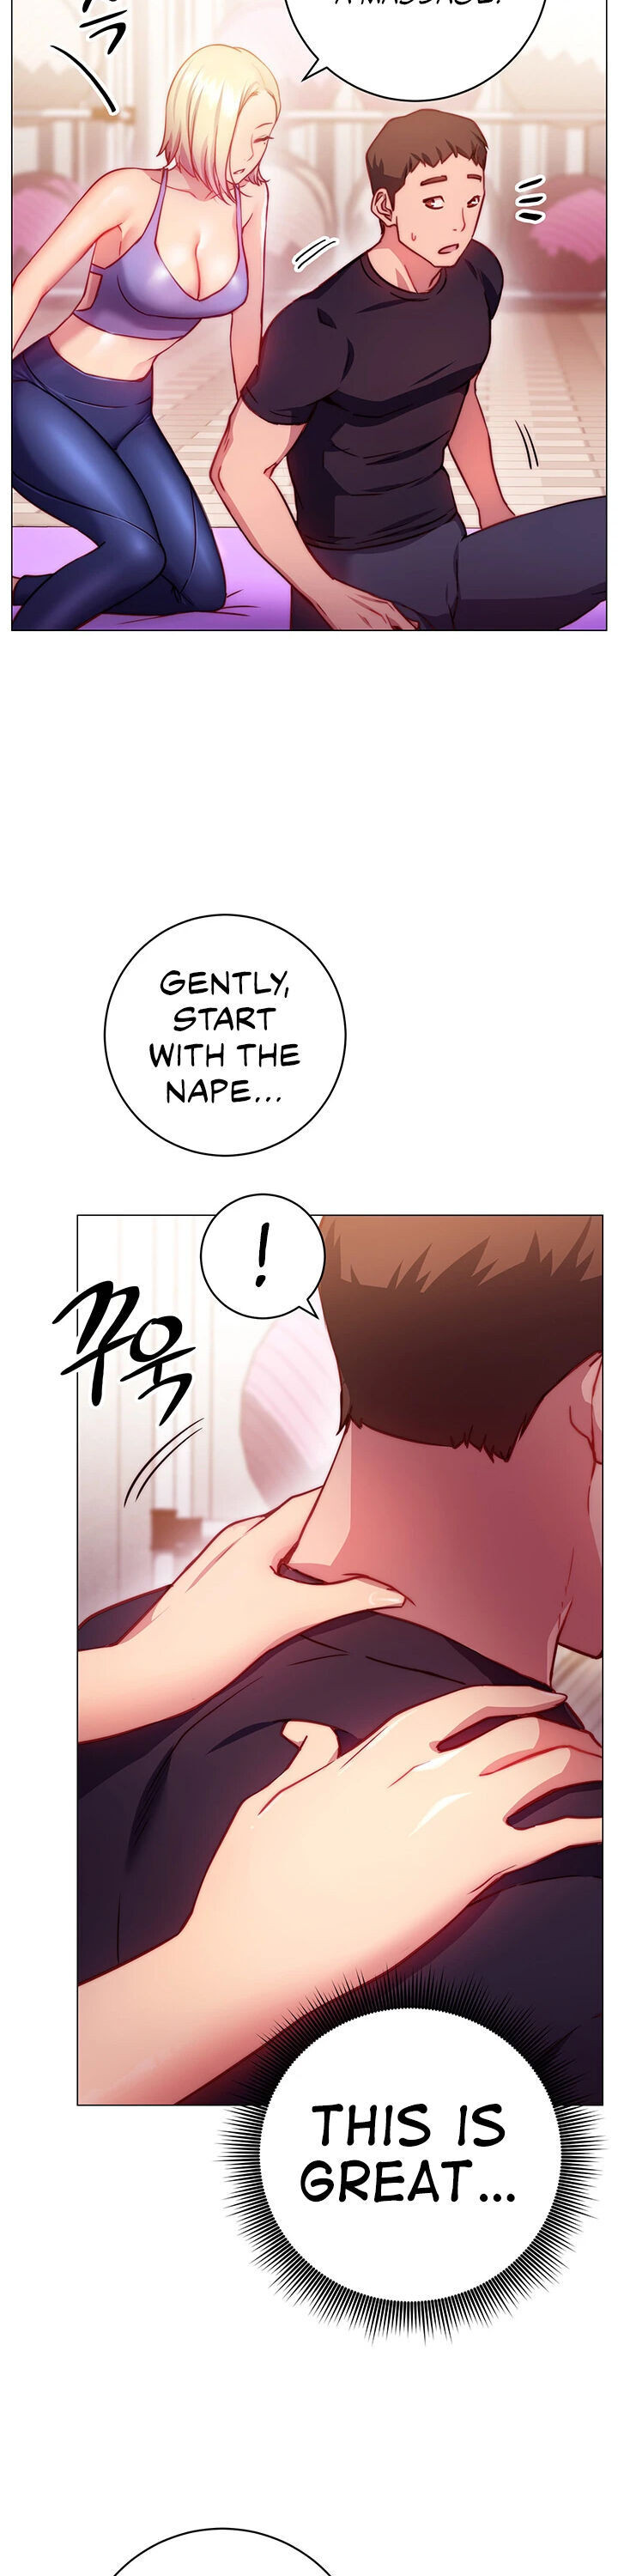 Xem ảnh How About This Pose? Raw - Chapter 02 - 460385e49e1c32a665 - Hentai24h.Tv